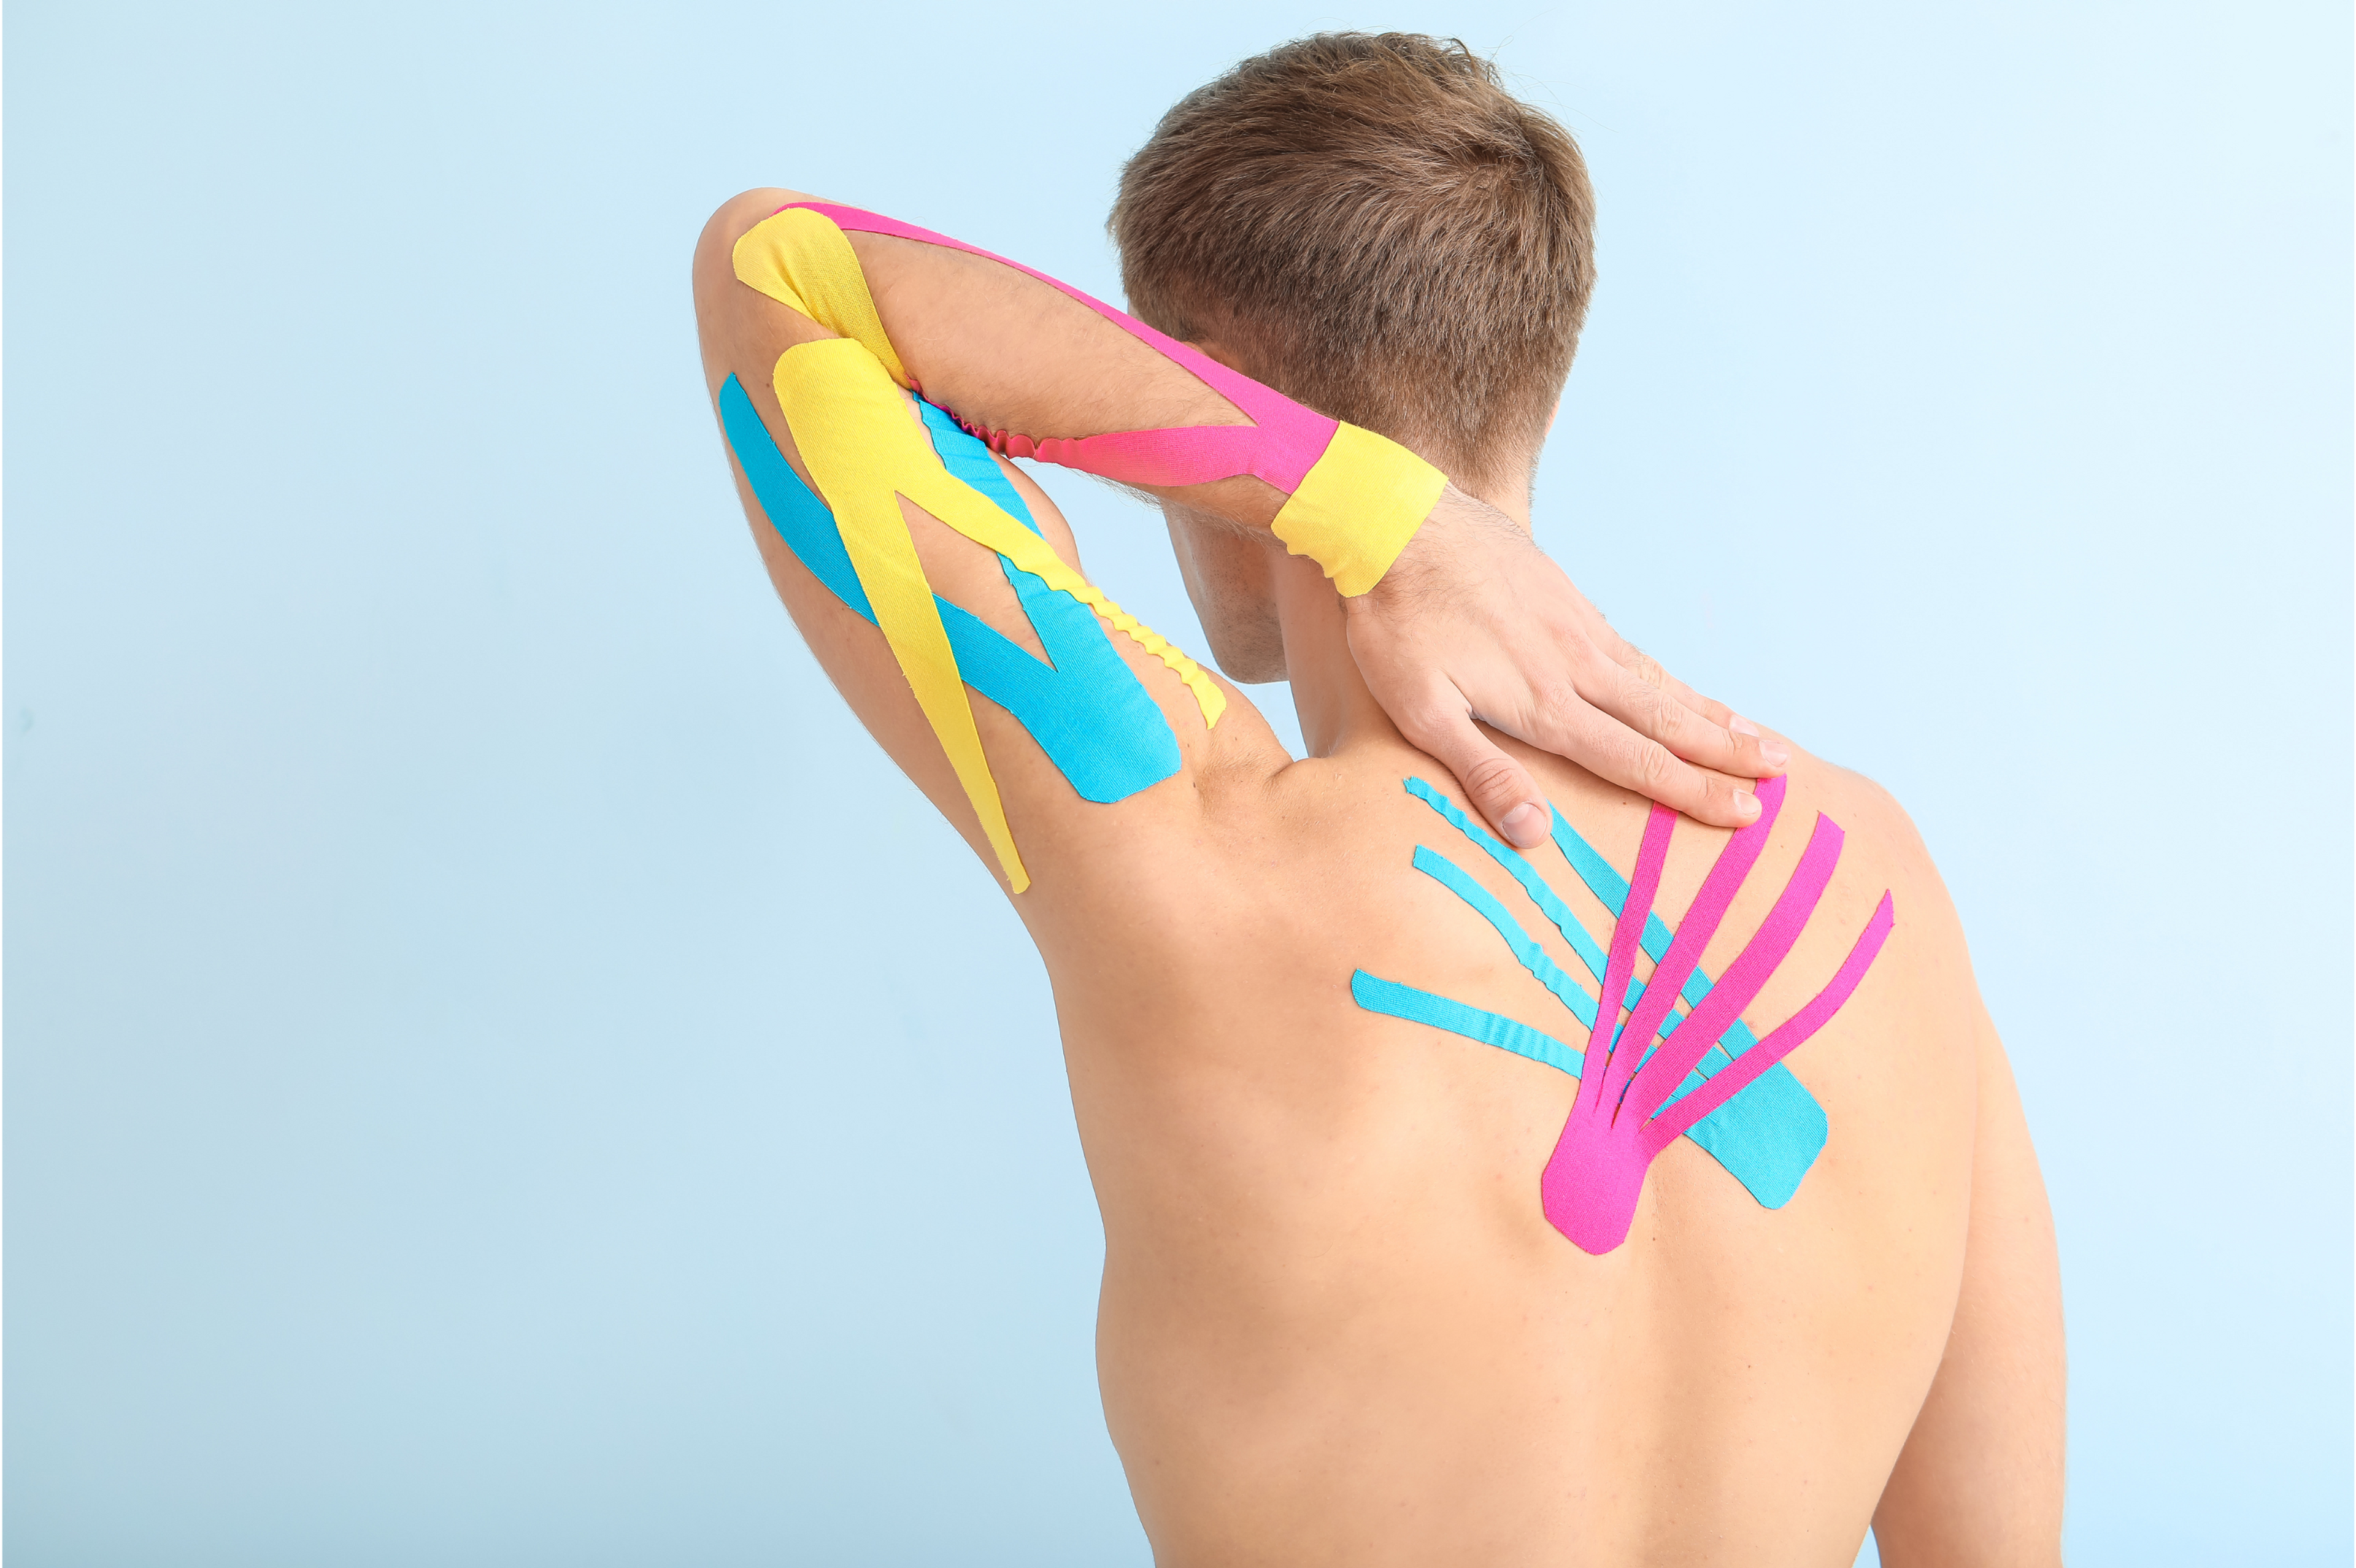 Kinesio tape likely works through the placebo effect.